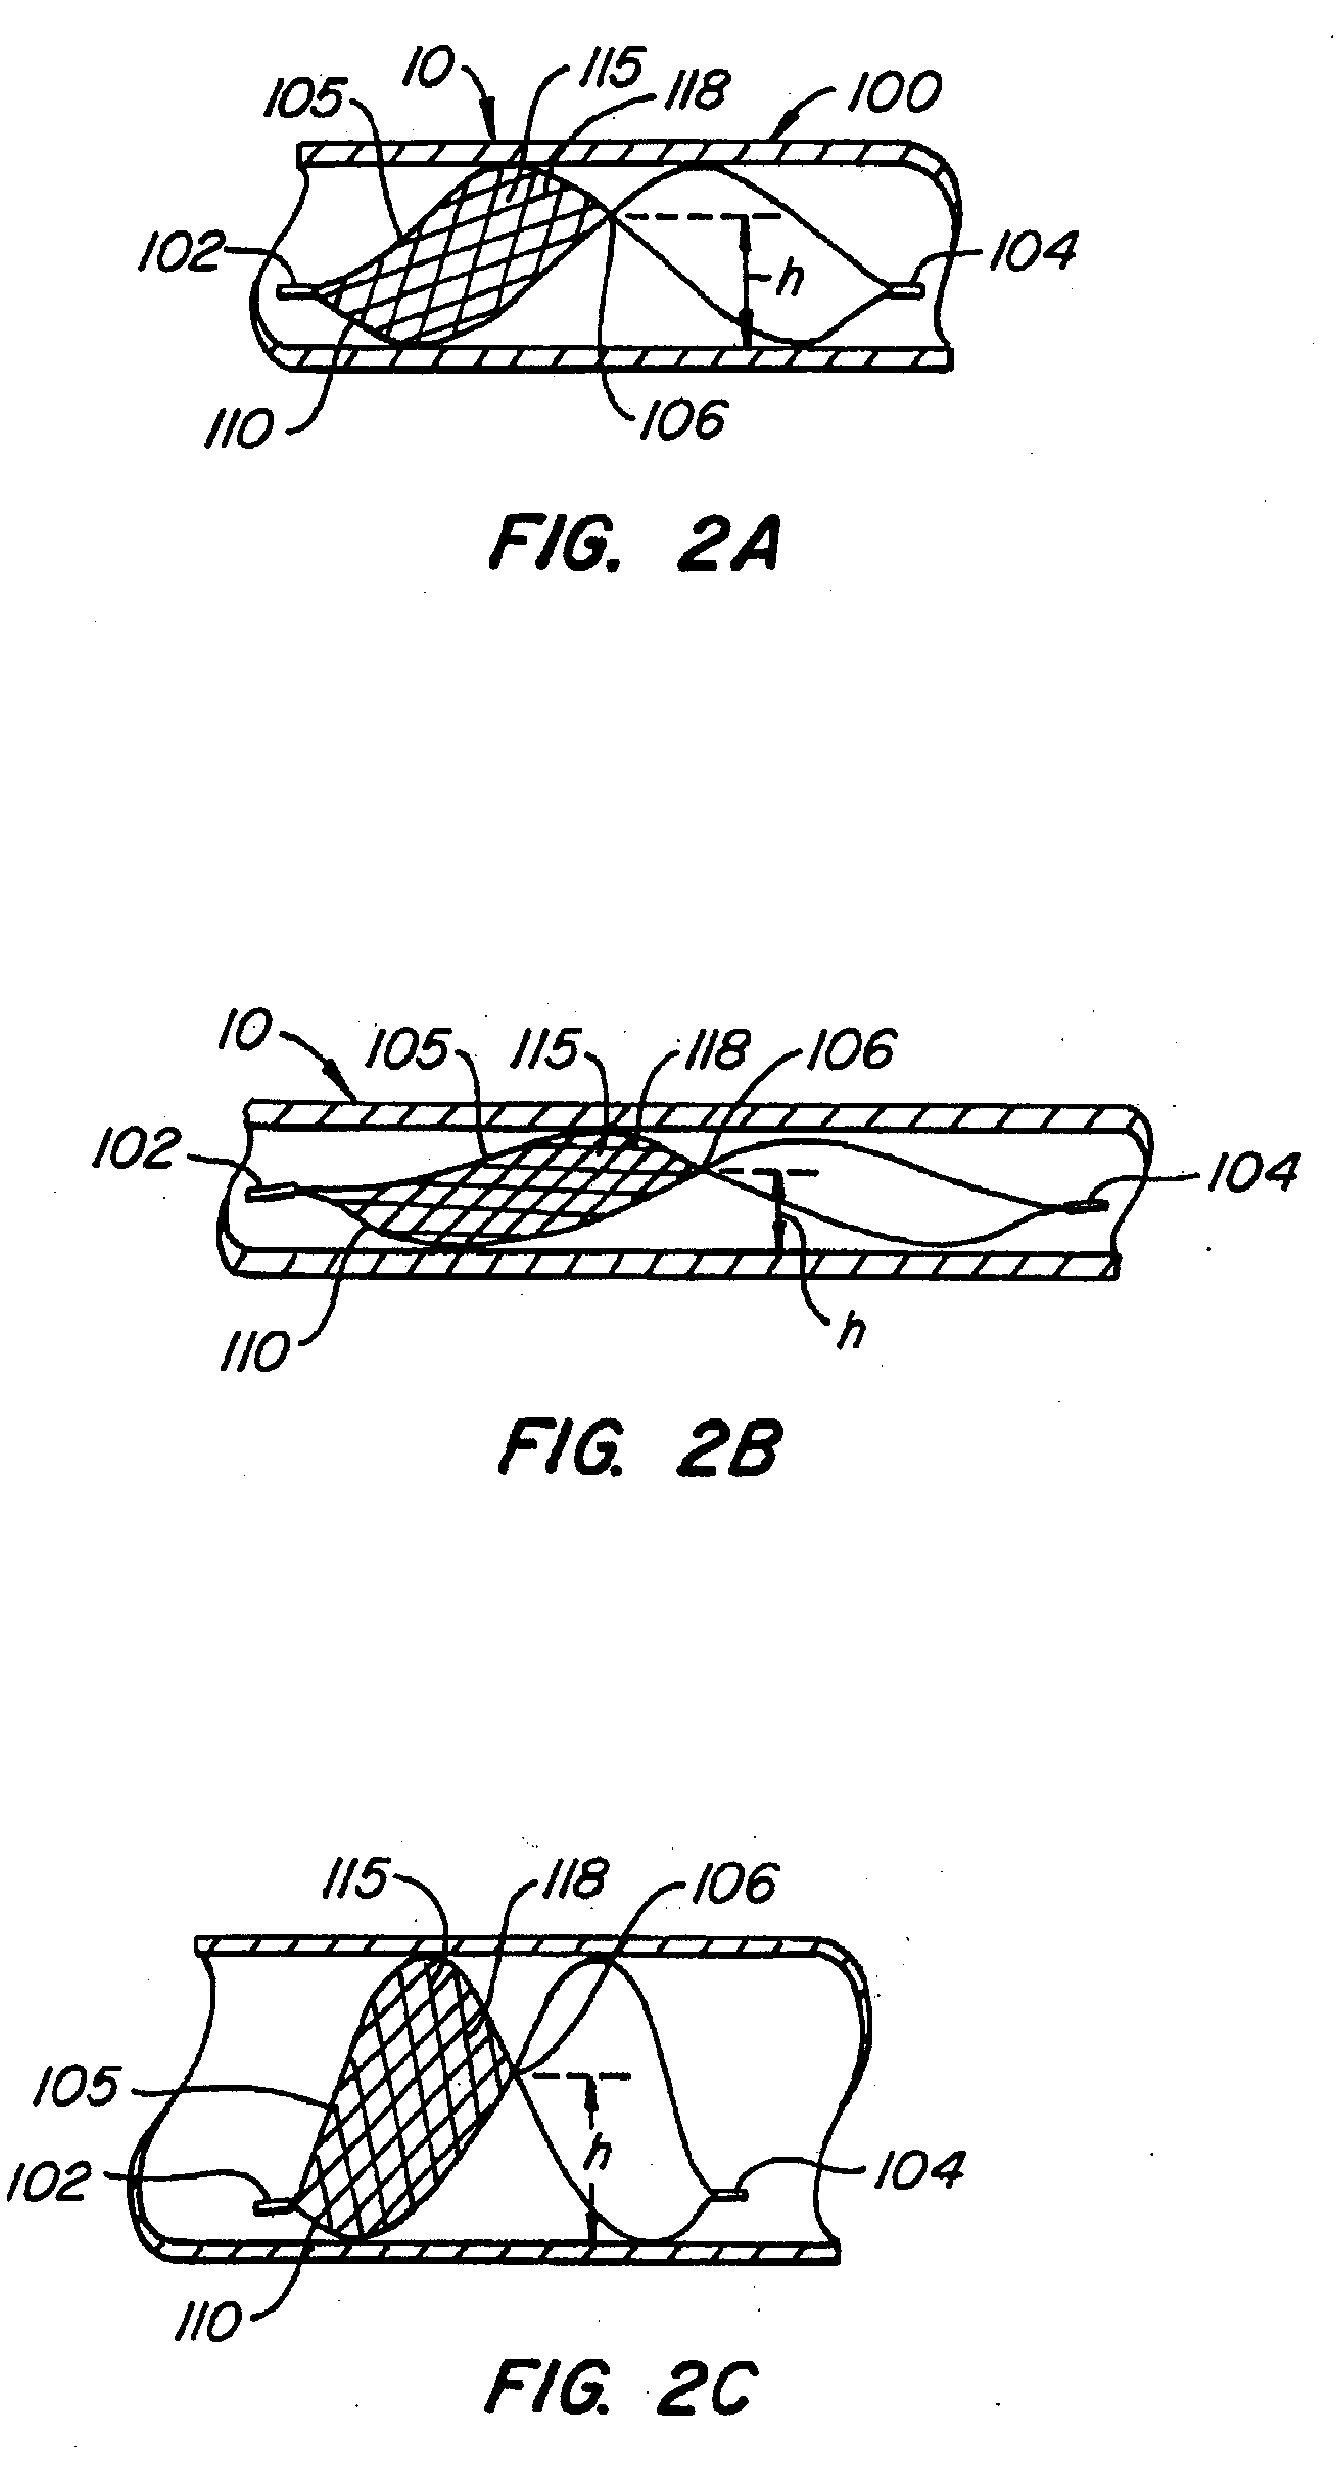 Methods for maintaining a filtering device within a lumen